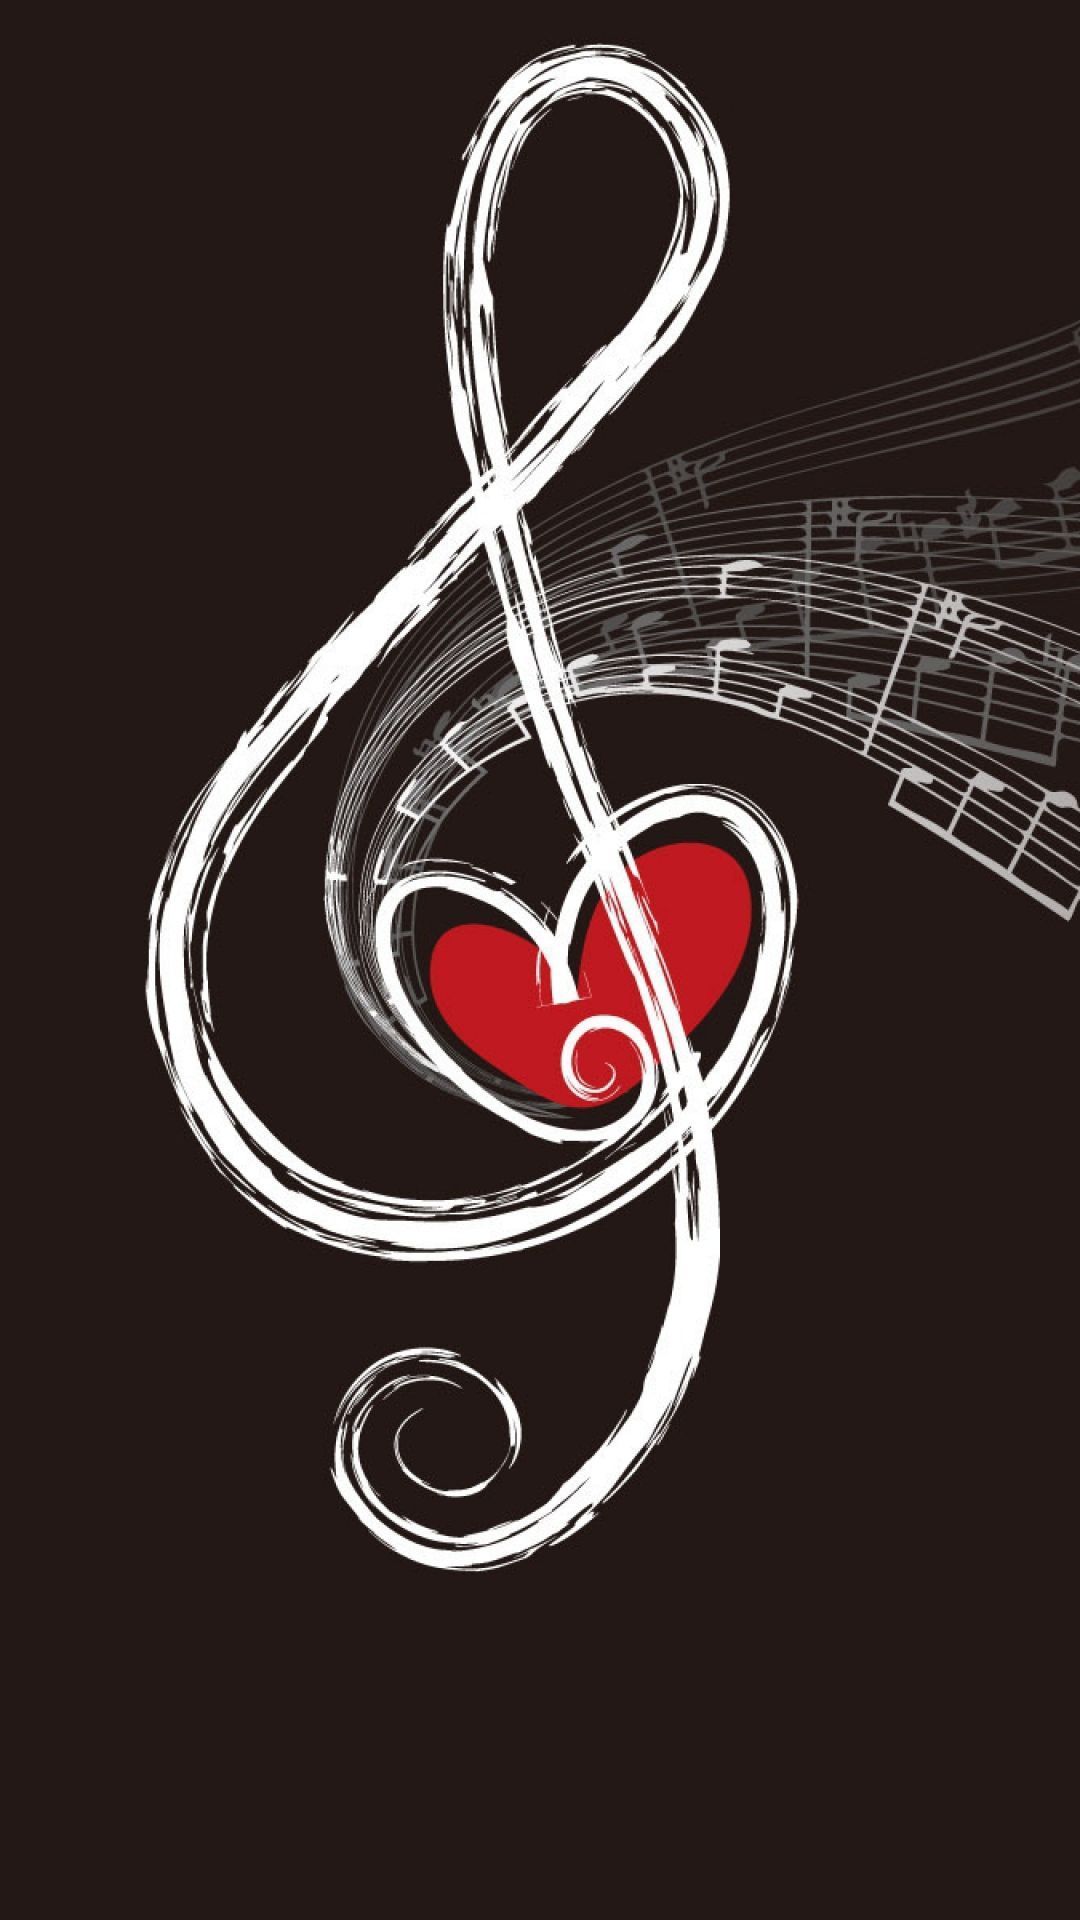 Download Wallpaper 1080x1920 Treble clef, Drawing, Chalk Sony